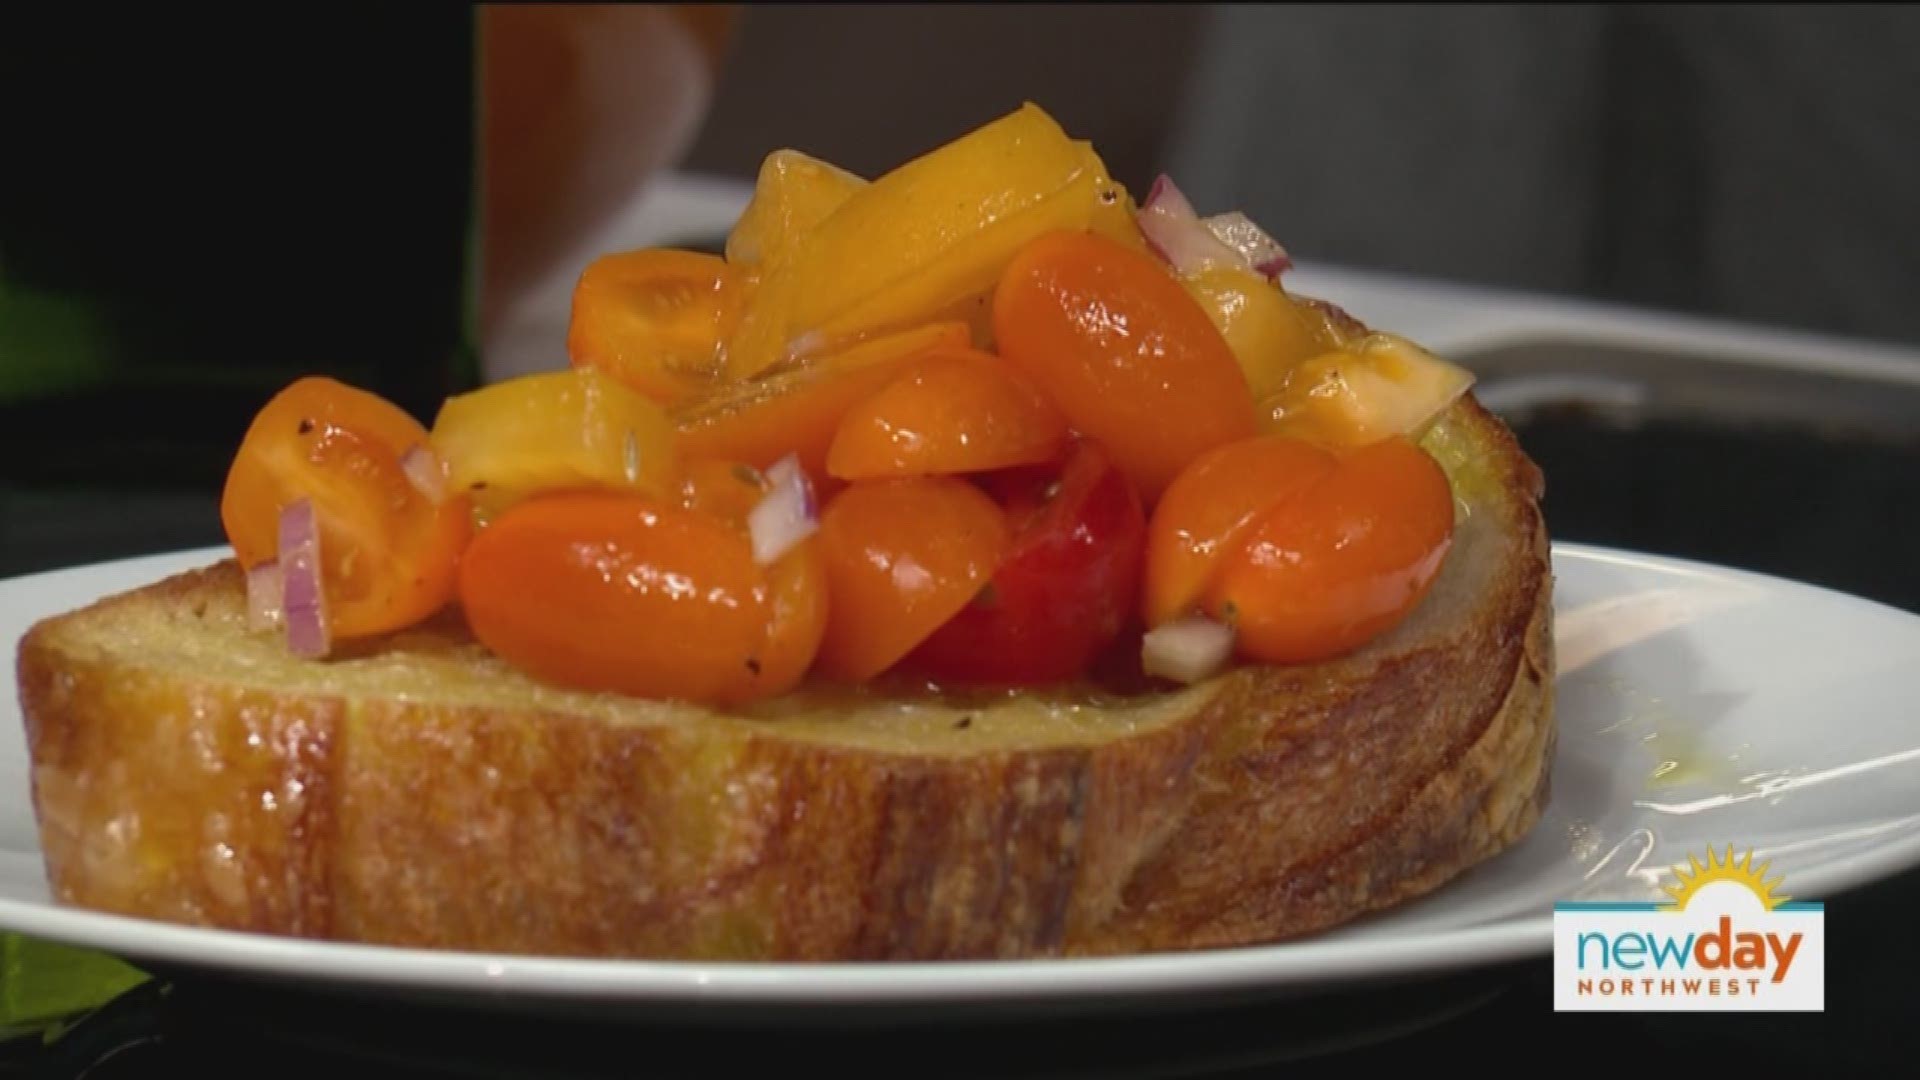 We're getting a preview of Sarah Copeland's latest book with her Moroccan Tomato Toast.